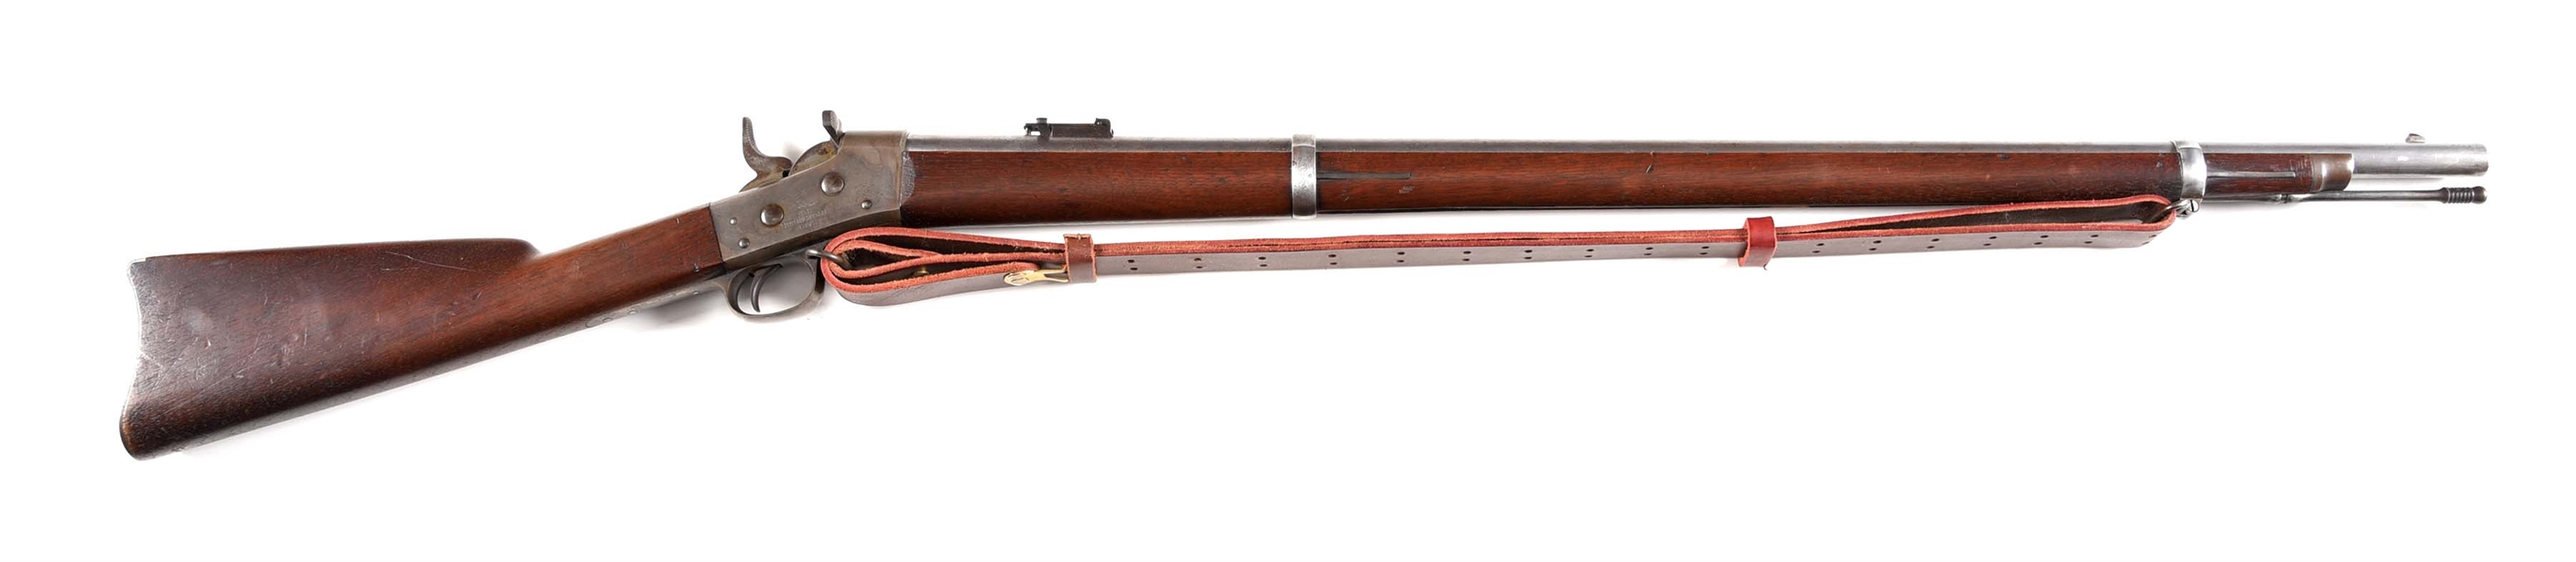 (A) US SPRINGFIELD MODEL 1871 ROLLING BLOCK RIFLE DATED 1872.